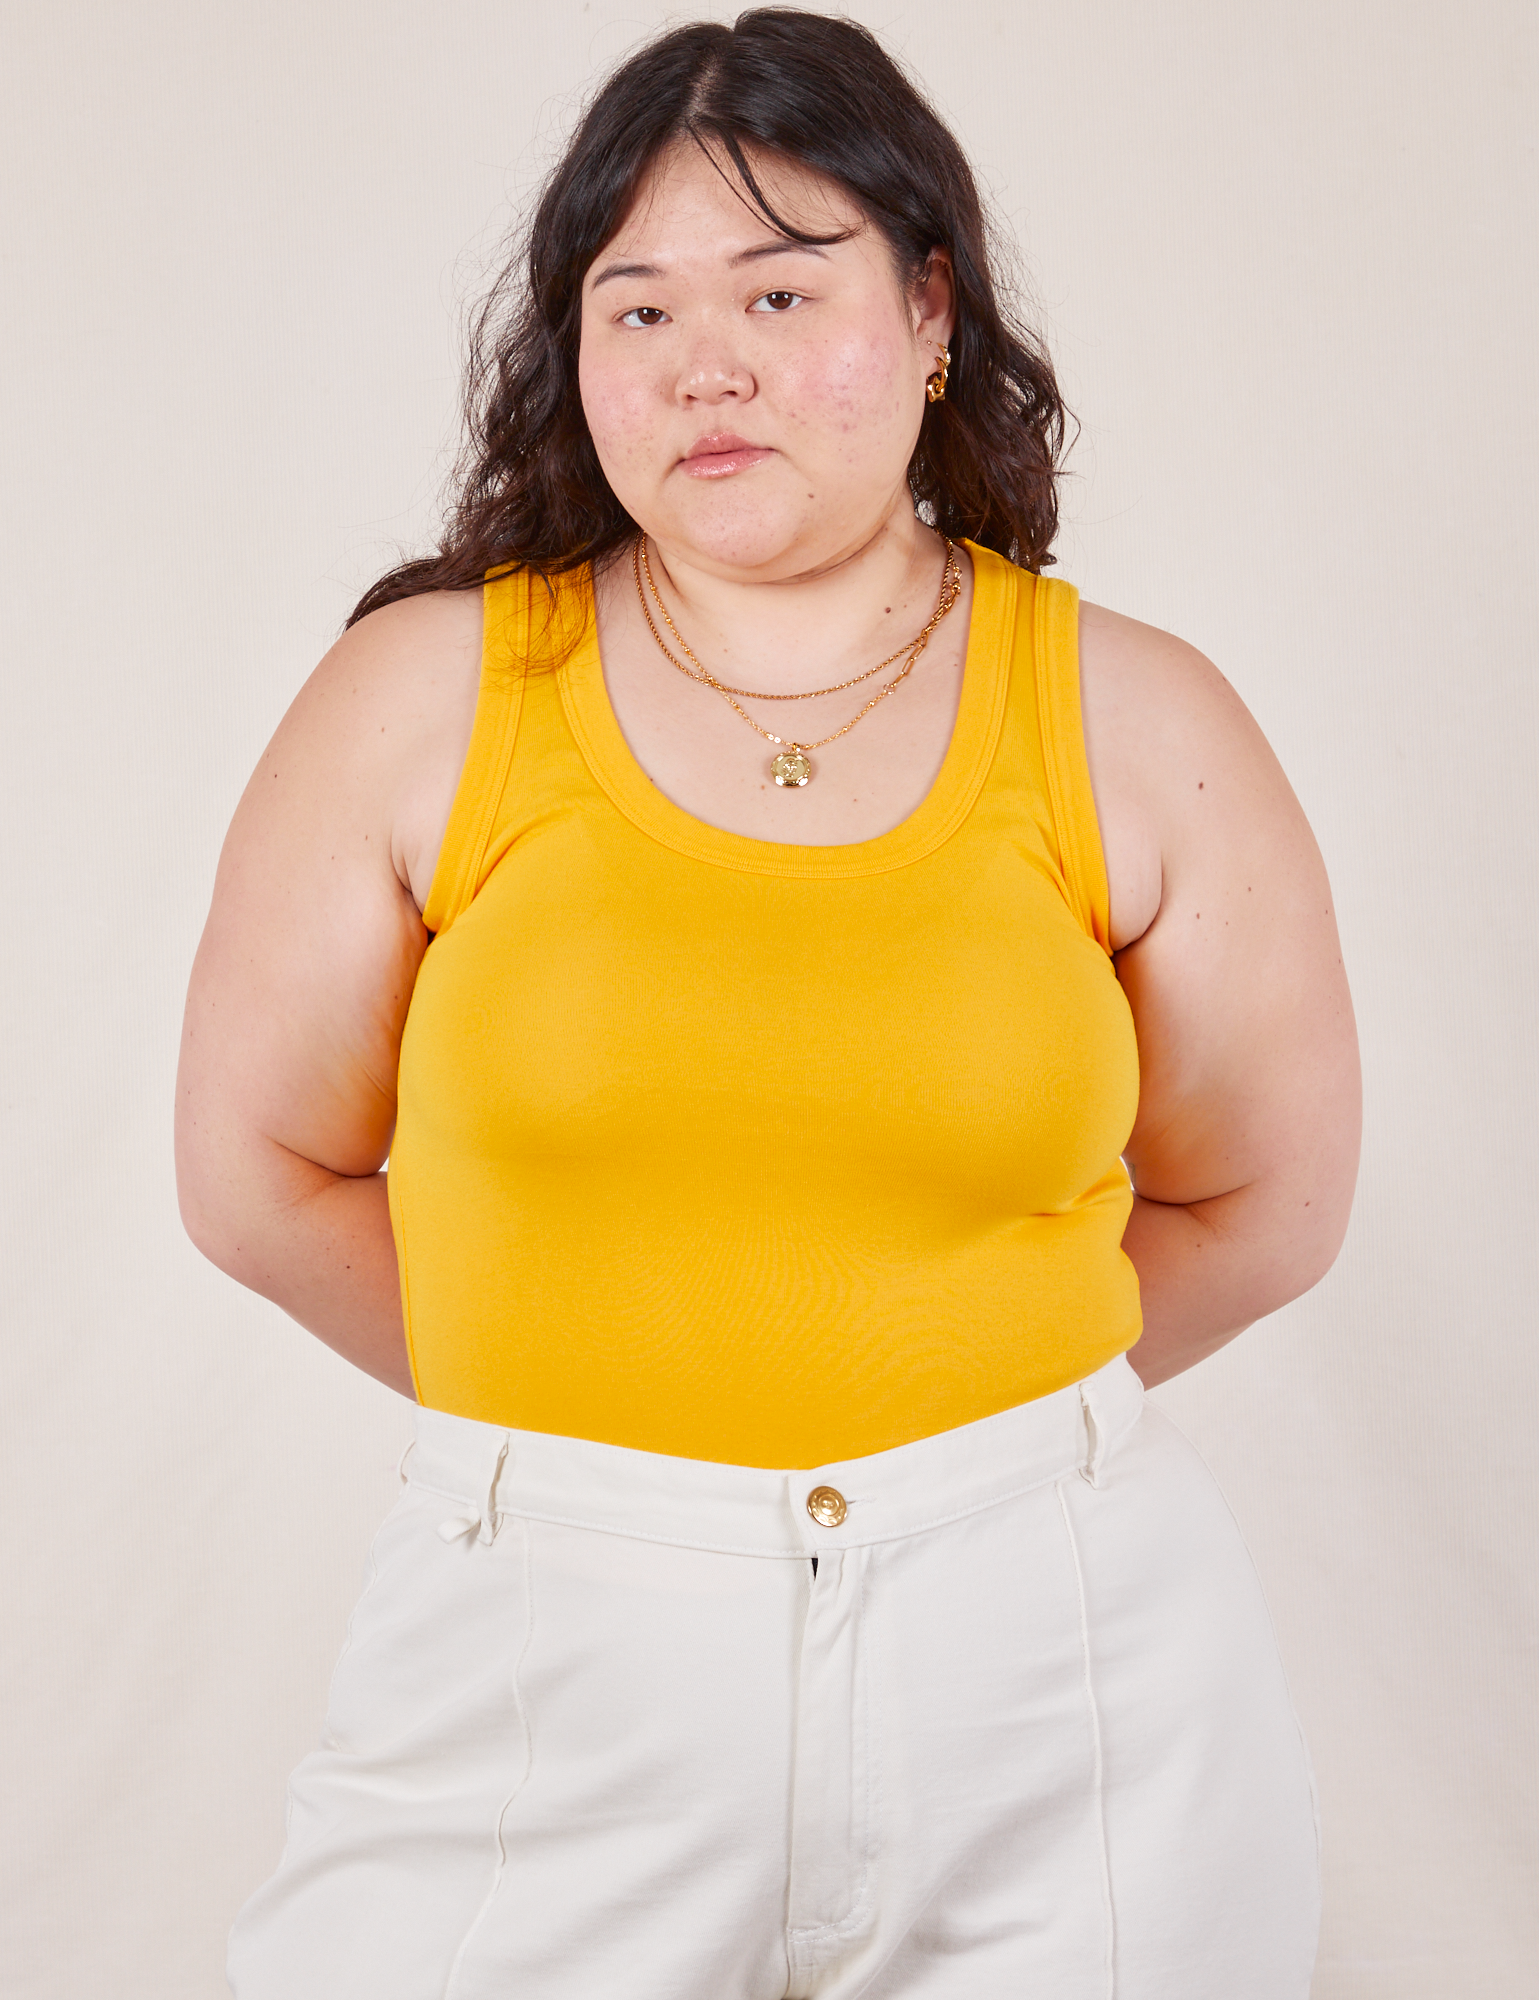 Ashley is 5’7” and wearing L Tank Top in Sunshine Yellow